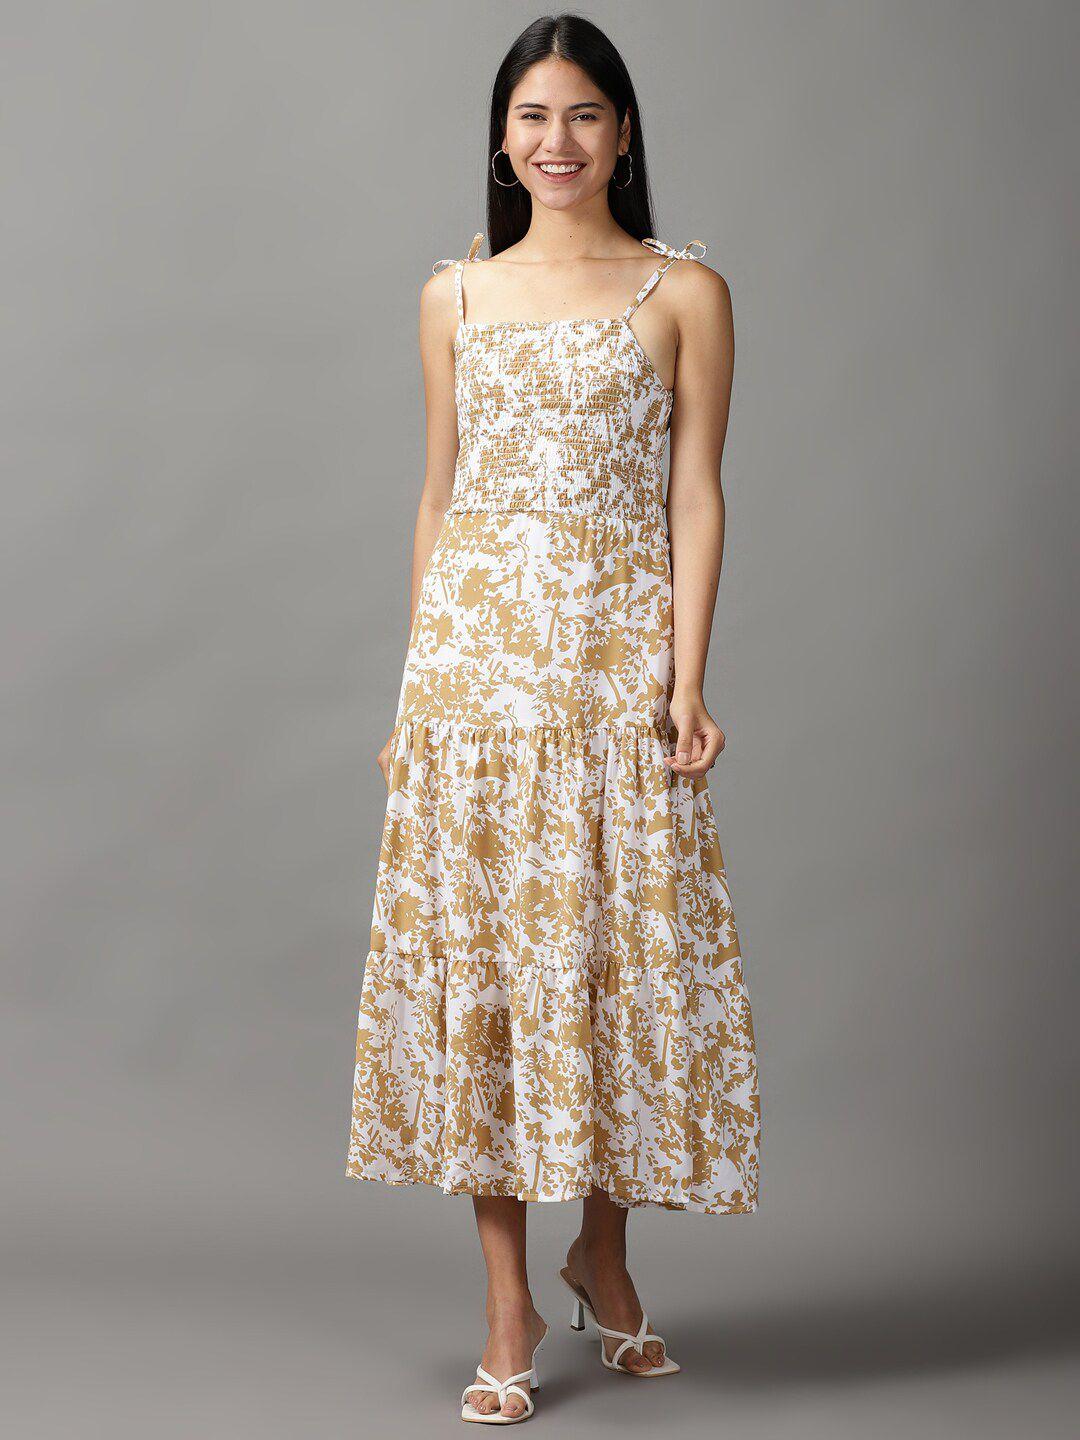 showoff-women-white-&-brown-midi-abstract-dress